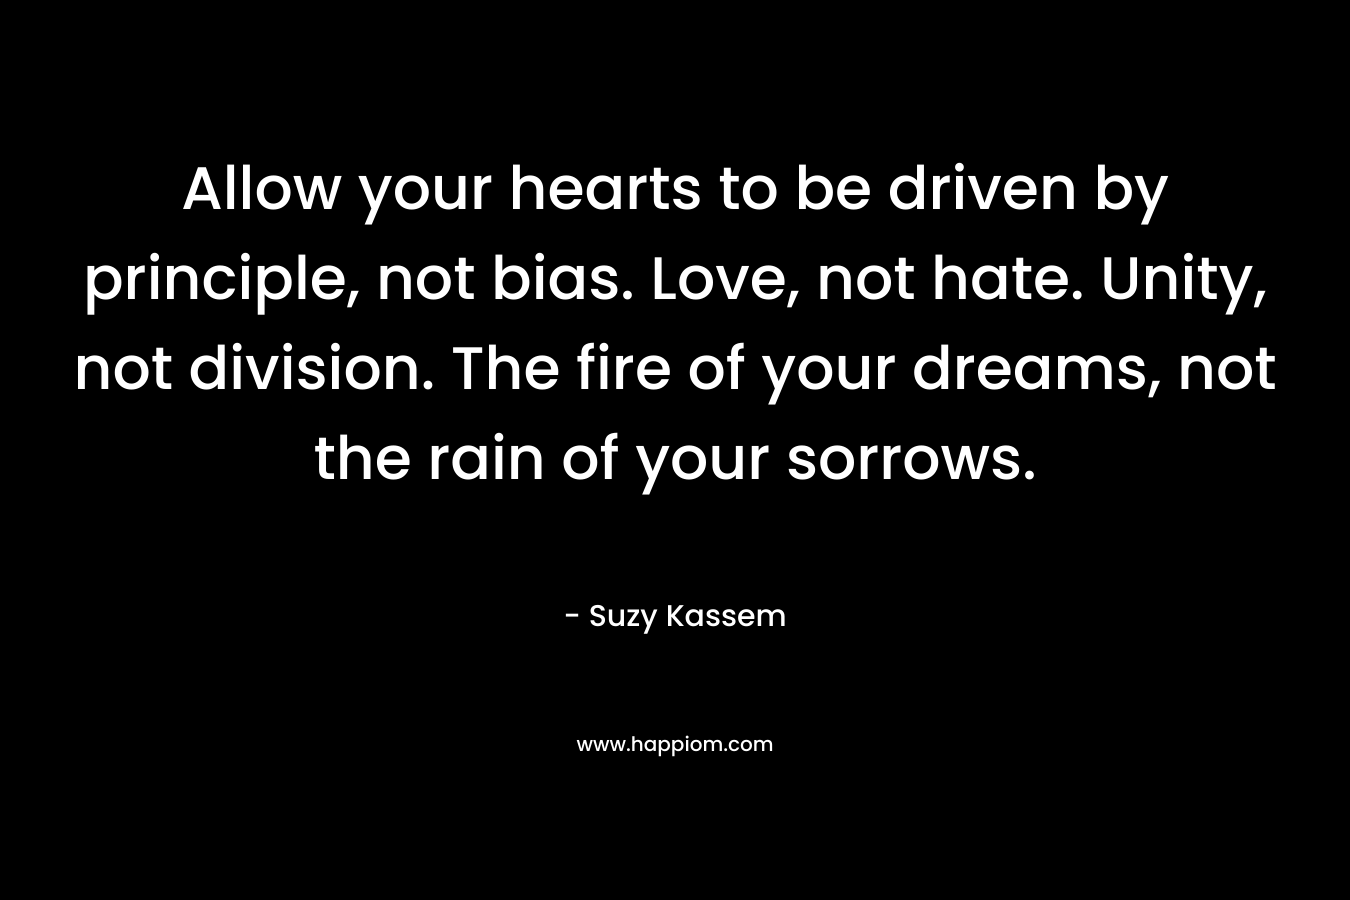 Allow your hearts to be driven by principle, not bias. Love, not hate. Unity, not division. The fire of your dreams, not the rain of your sorrows. – Suzy Kassem